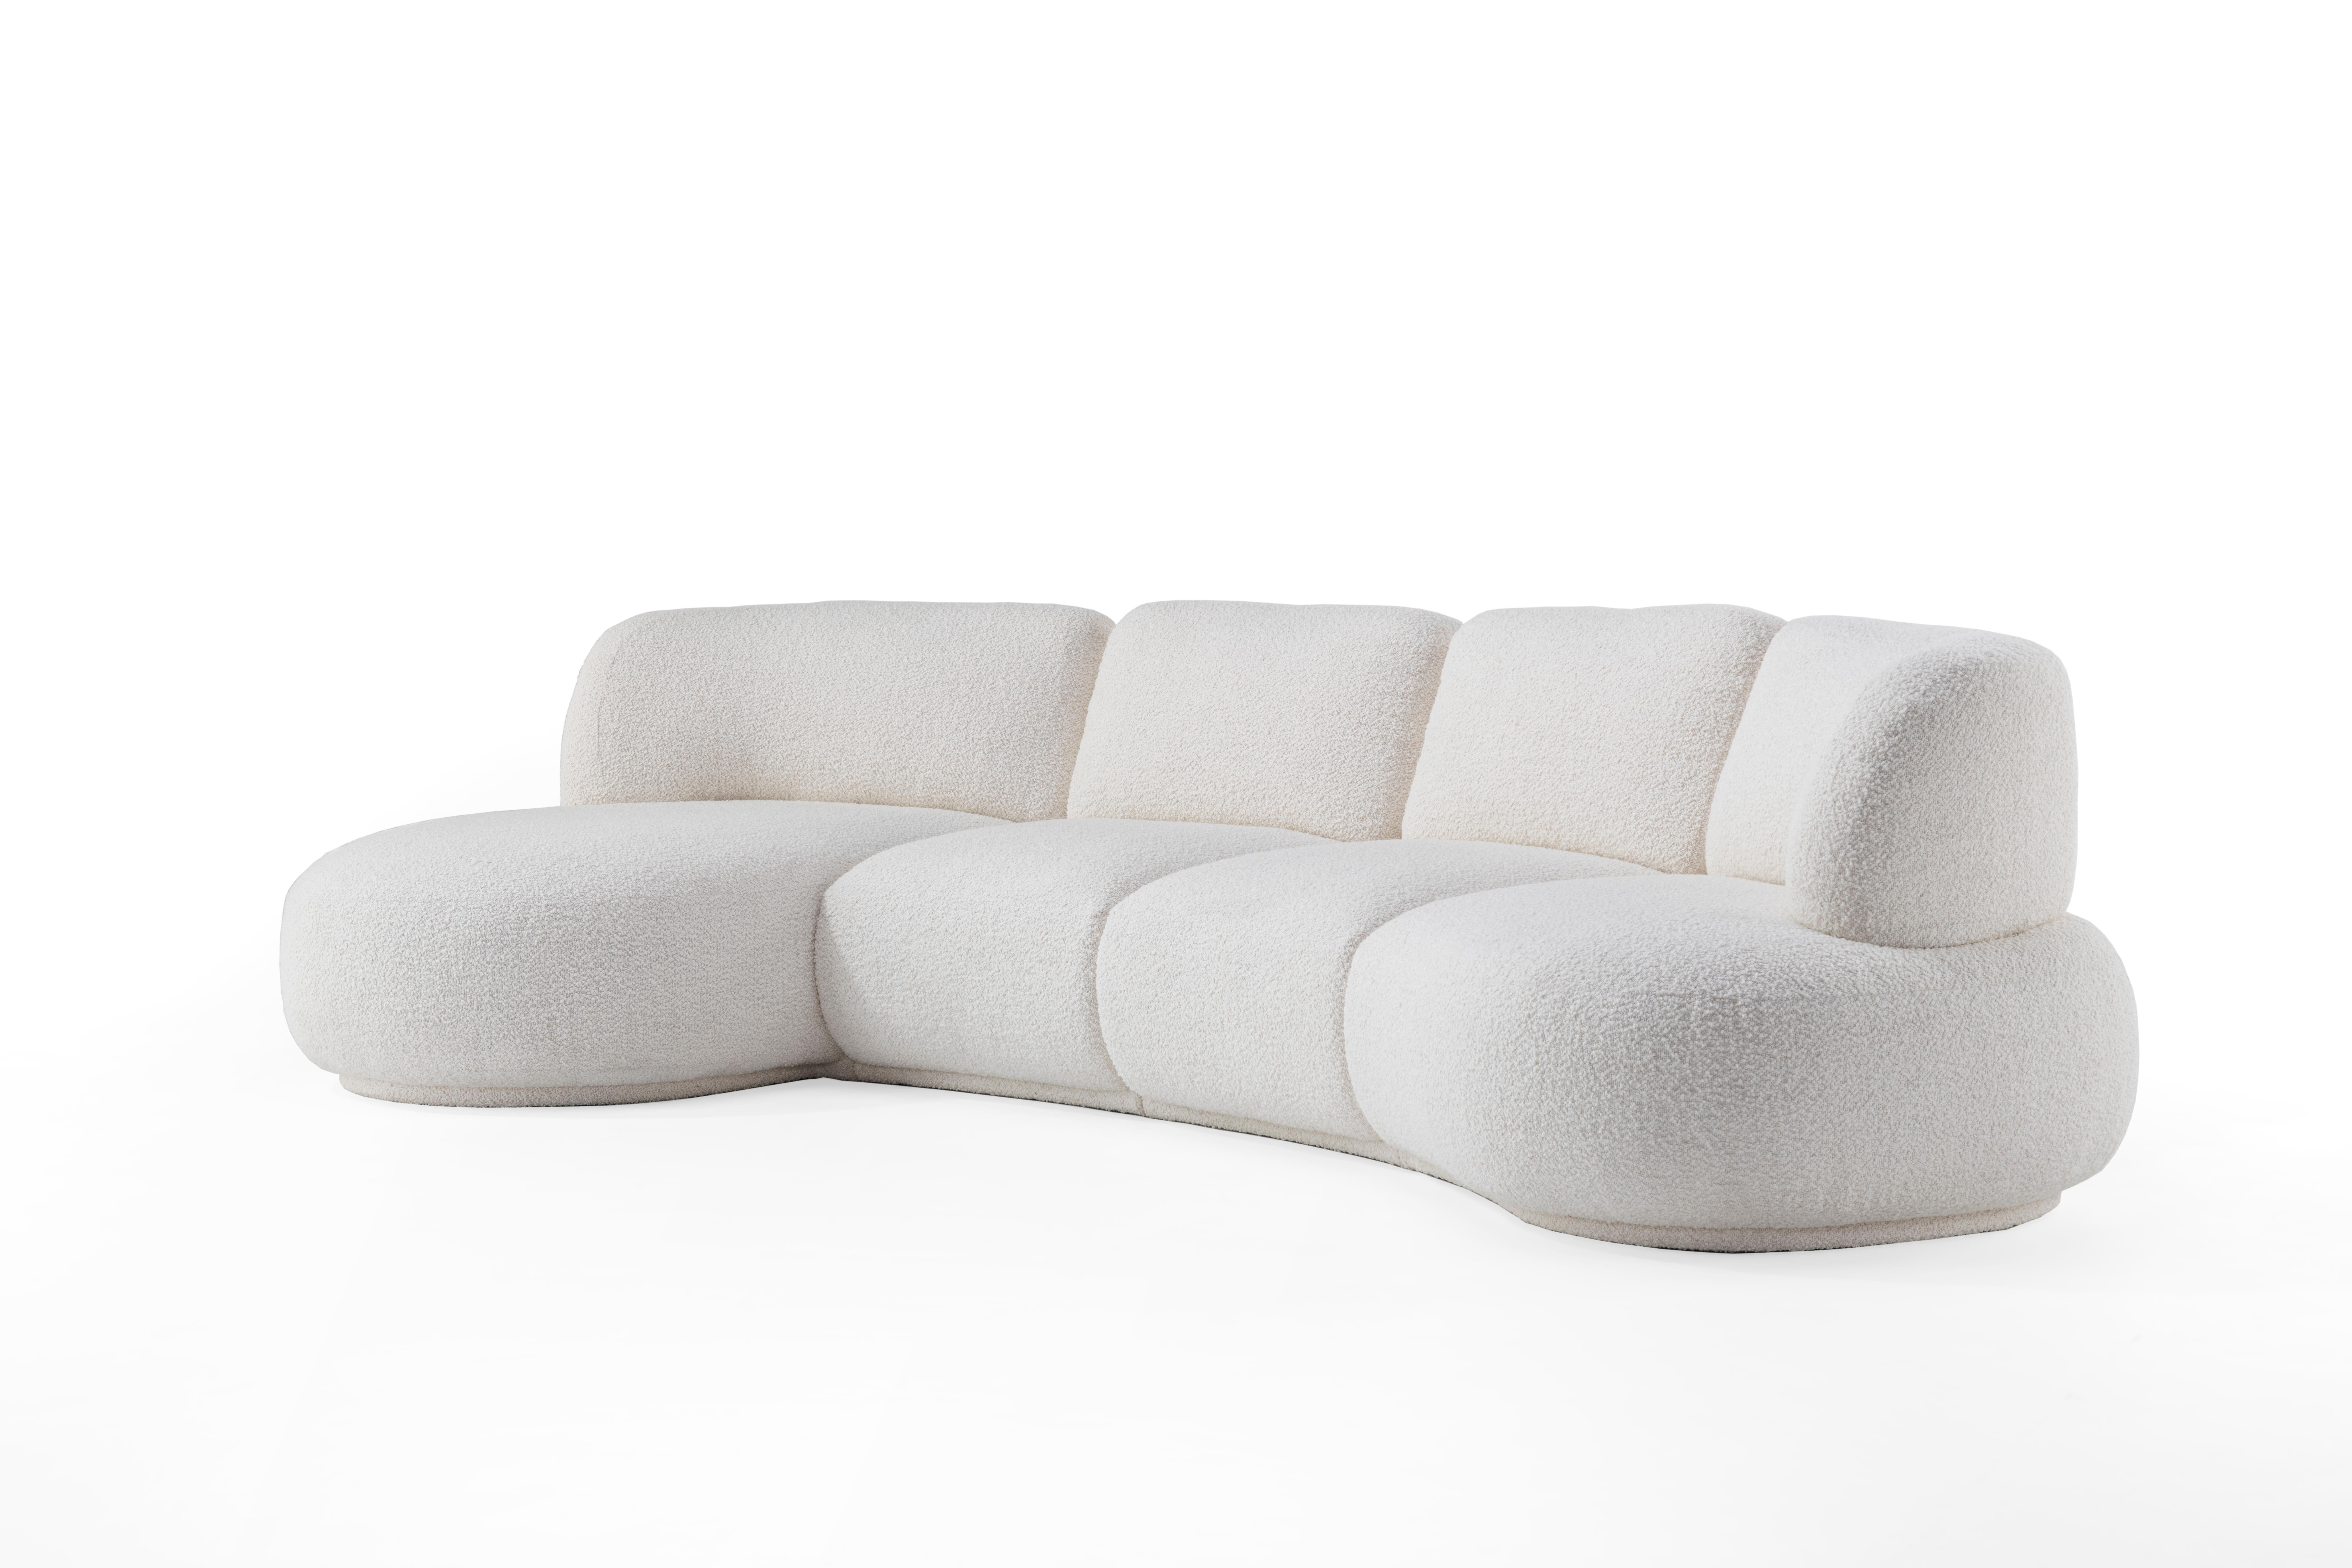 The unbridled desire to achieve the perfect balance of a modular sofa led our design team to HANJI. Named “desire” in an African word, this modular sofa with curved shapes is available in a combination of armrest elements, central elements and